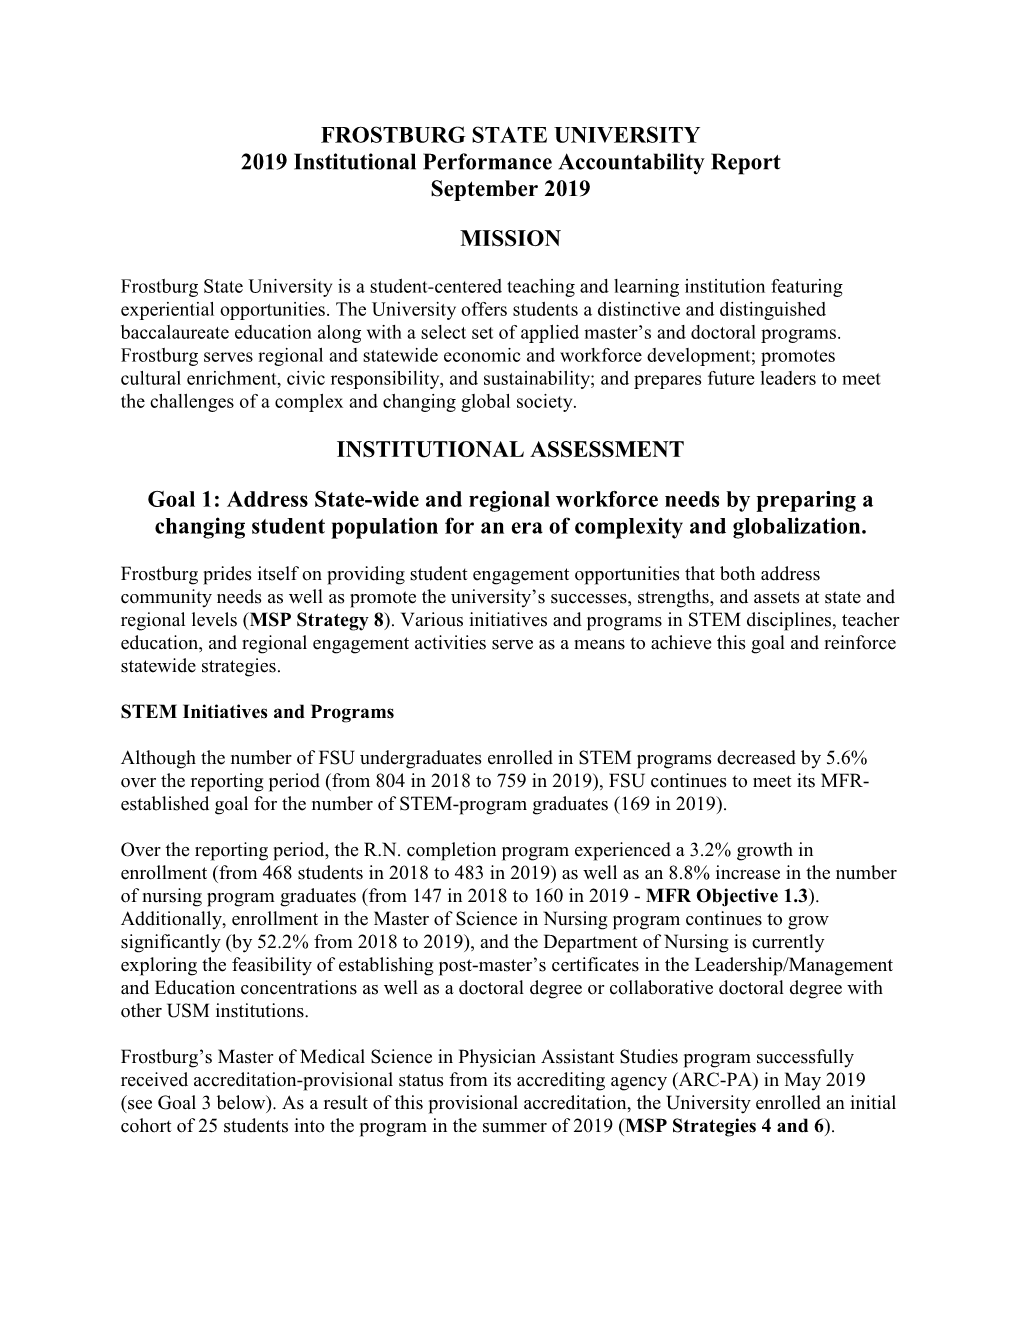 FROSTBURG STATE UNIVERSITY 2019 Institutional Performance Accountability Report September 2019